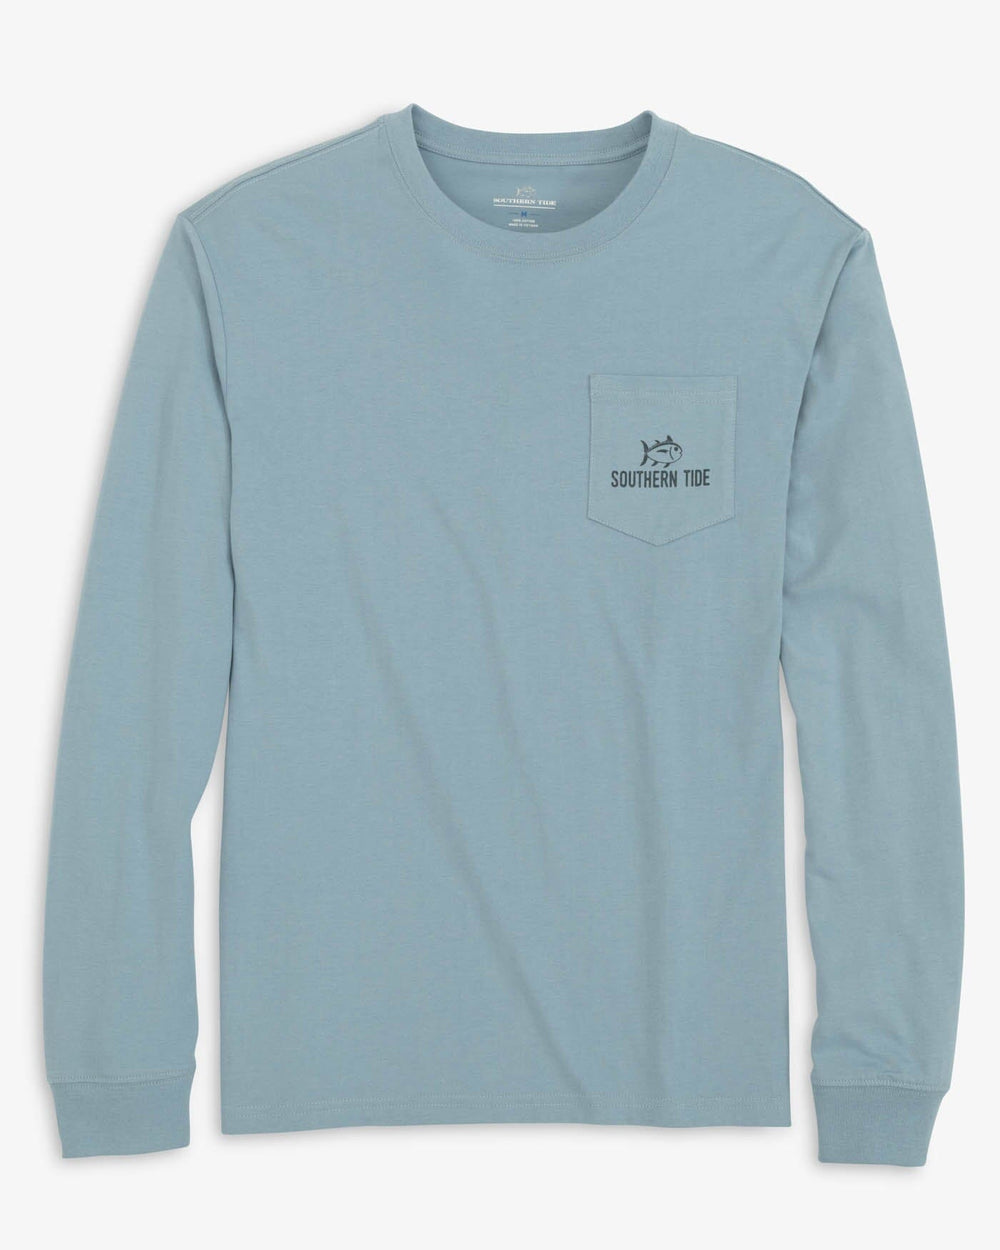 The front view of the Southern Tide Gradient Carabiner Long Sleeve T-Shirt by Southern Tide - Mountain Spring Blue